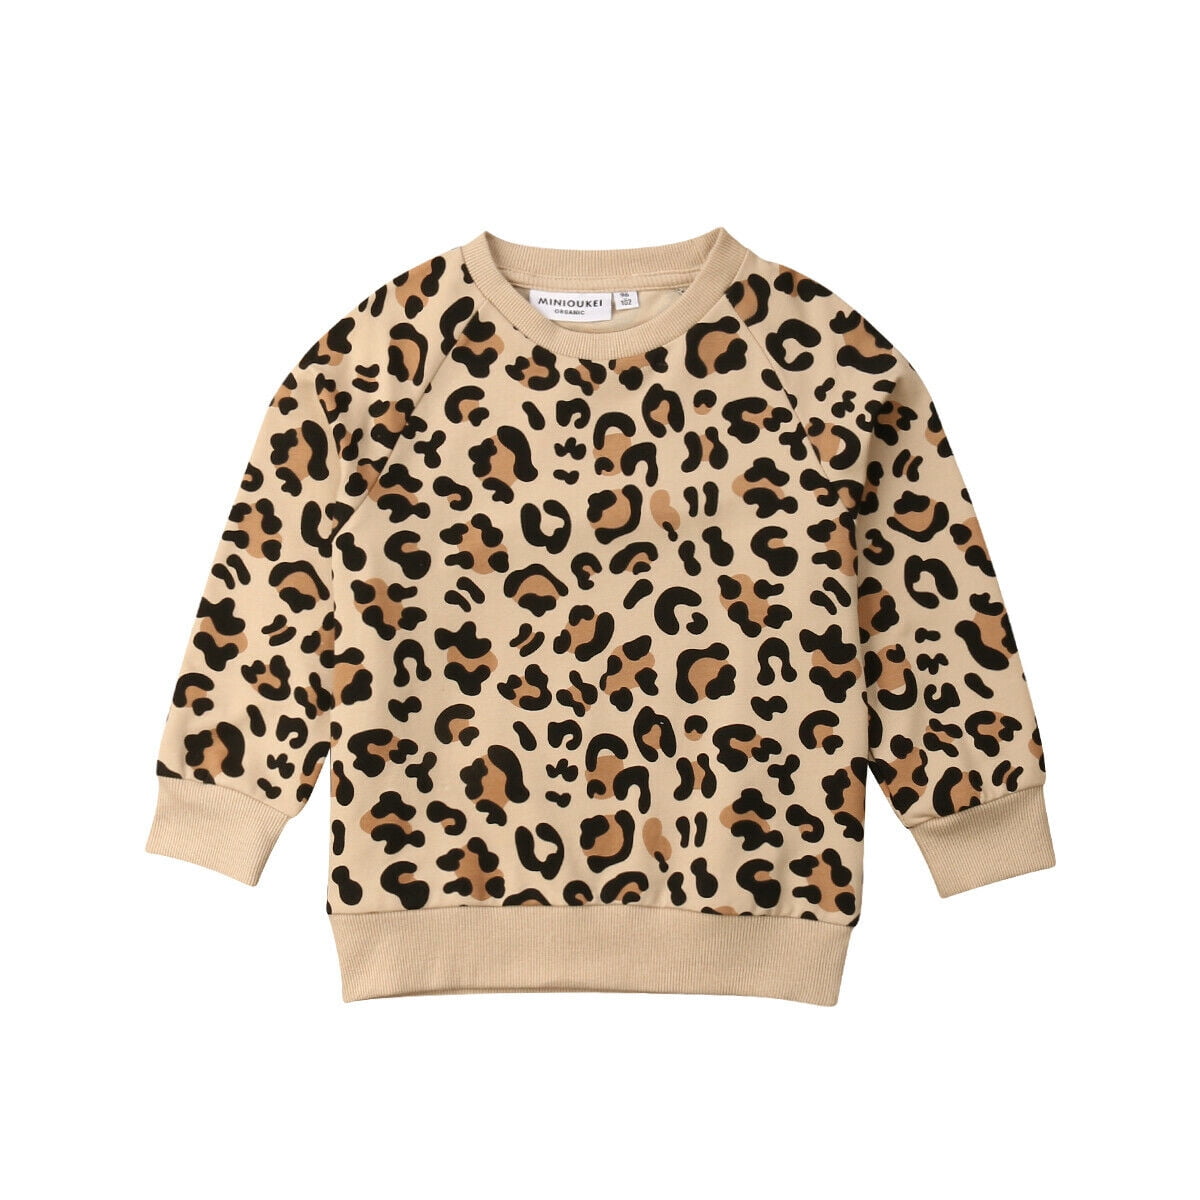 Ma&Baby - Baby Sweater Girl Boy Clothes Cute Children's Leopard Bunny ...